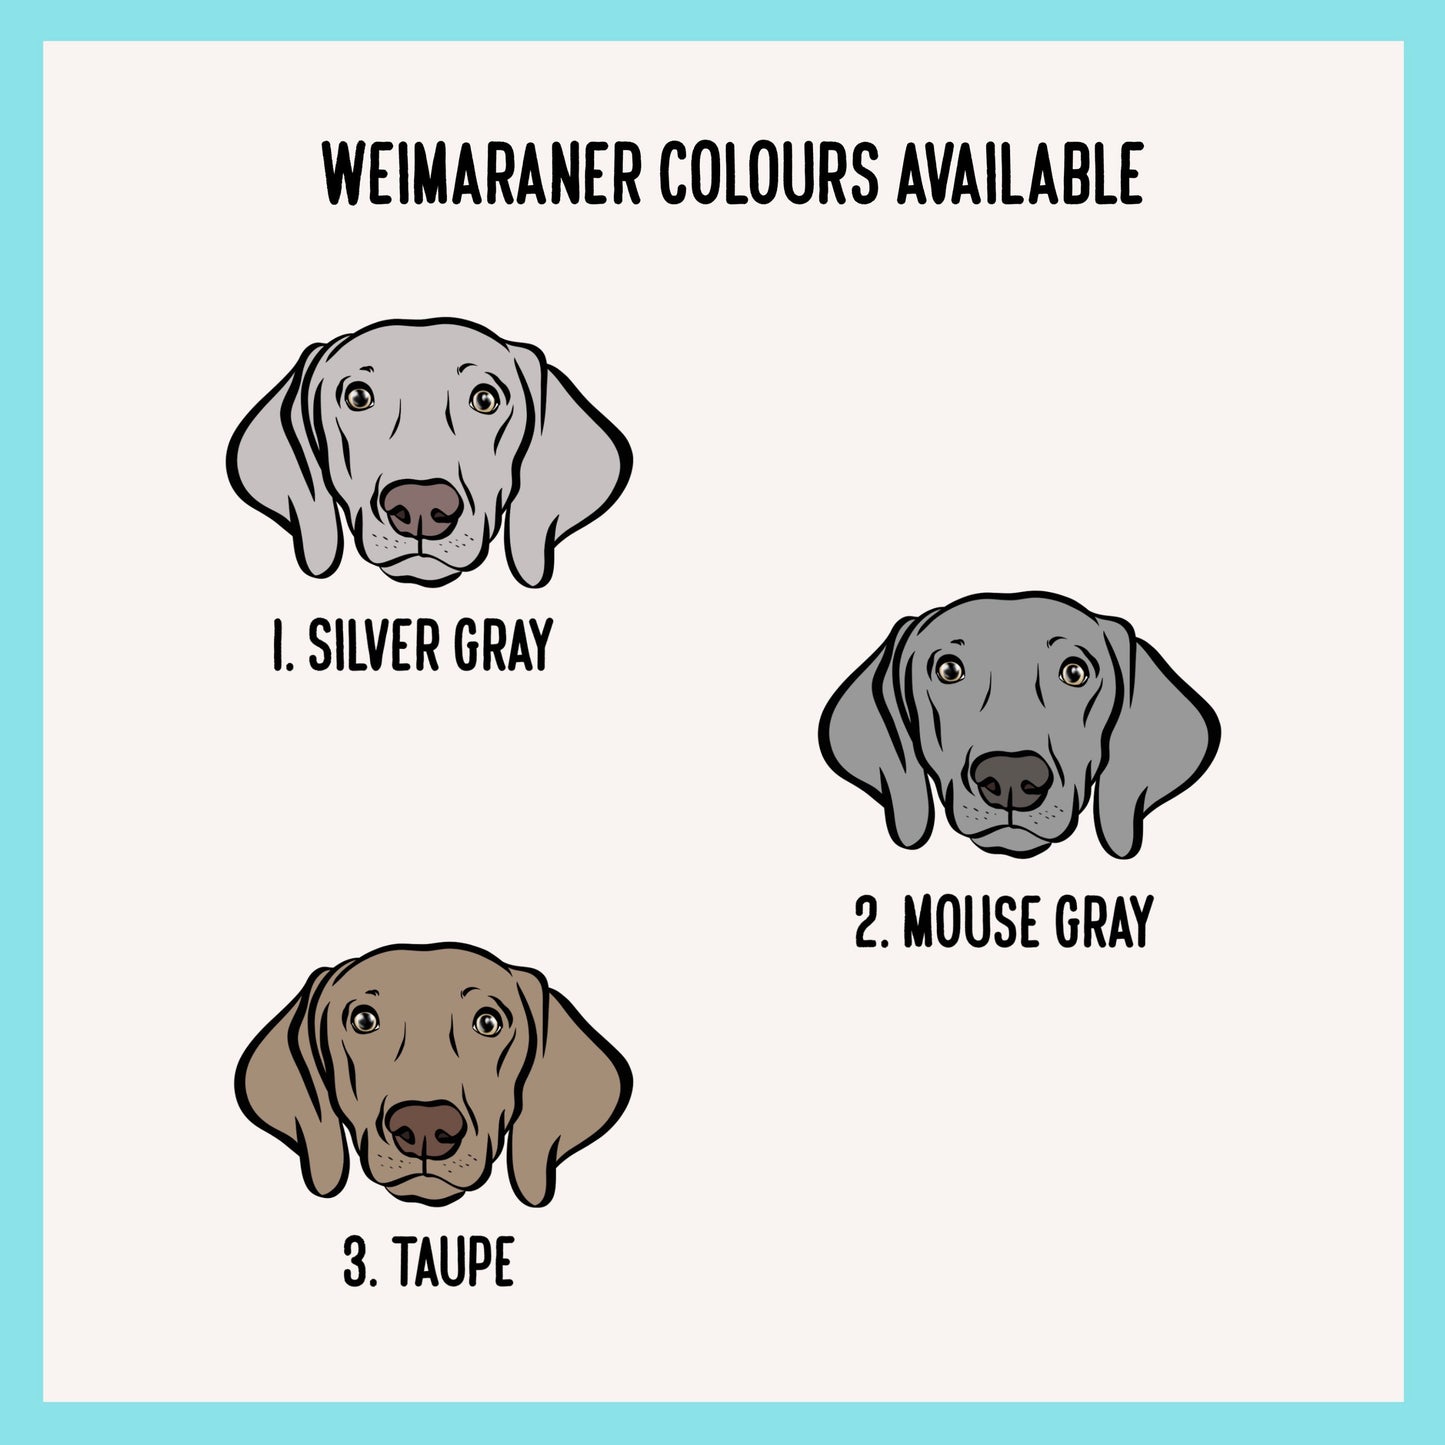 Weimaraner Face Phone Case/ Personalised Dog Breed Portrait Phone Case/ Cute Weimaraner Owner Gift/ Adorable Dog Phone Accessory/ Pet Gifts